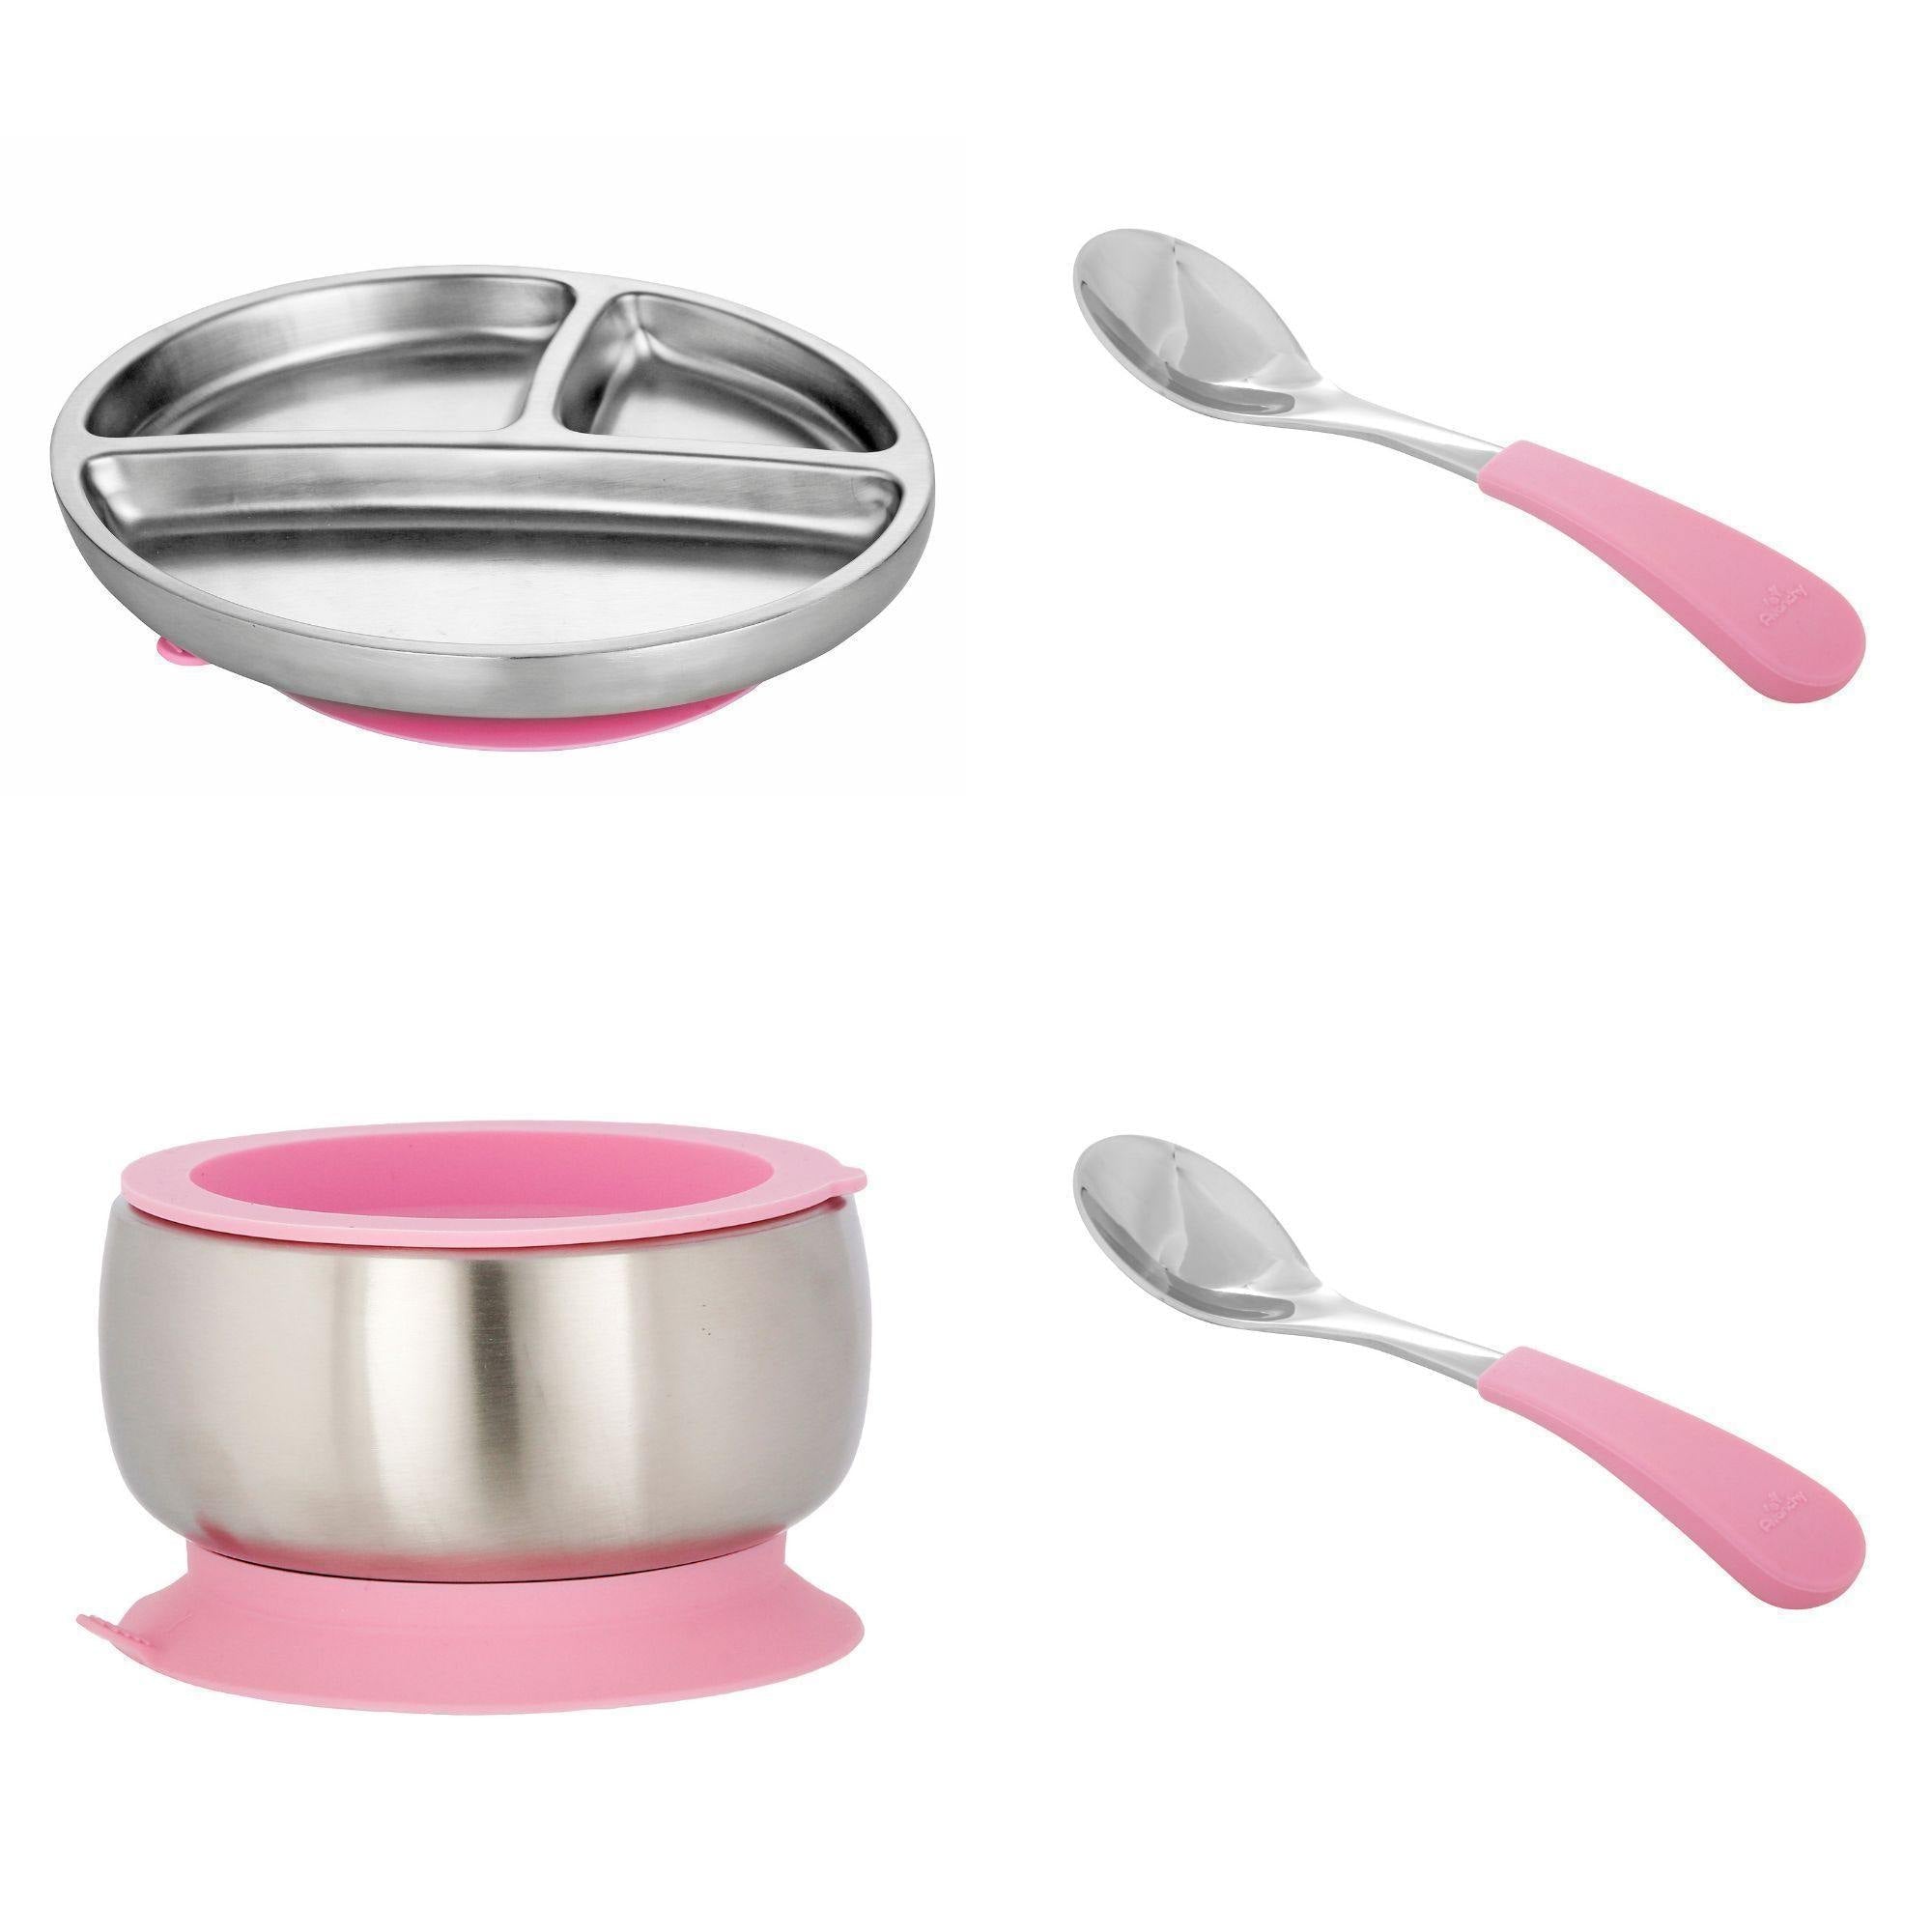 Avanchy Stainless Steel Baby Bowl + Spoon: Insulated + Stackable Lid -  Avanchy Sustainable Baby Dishware